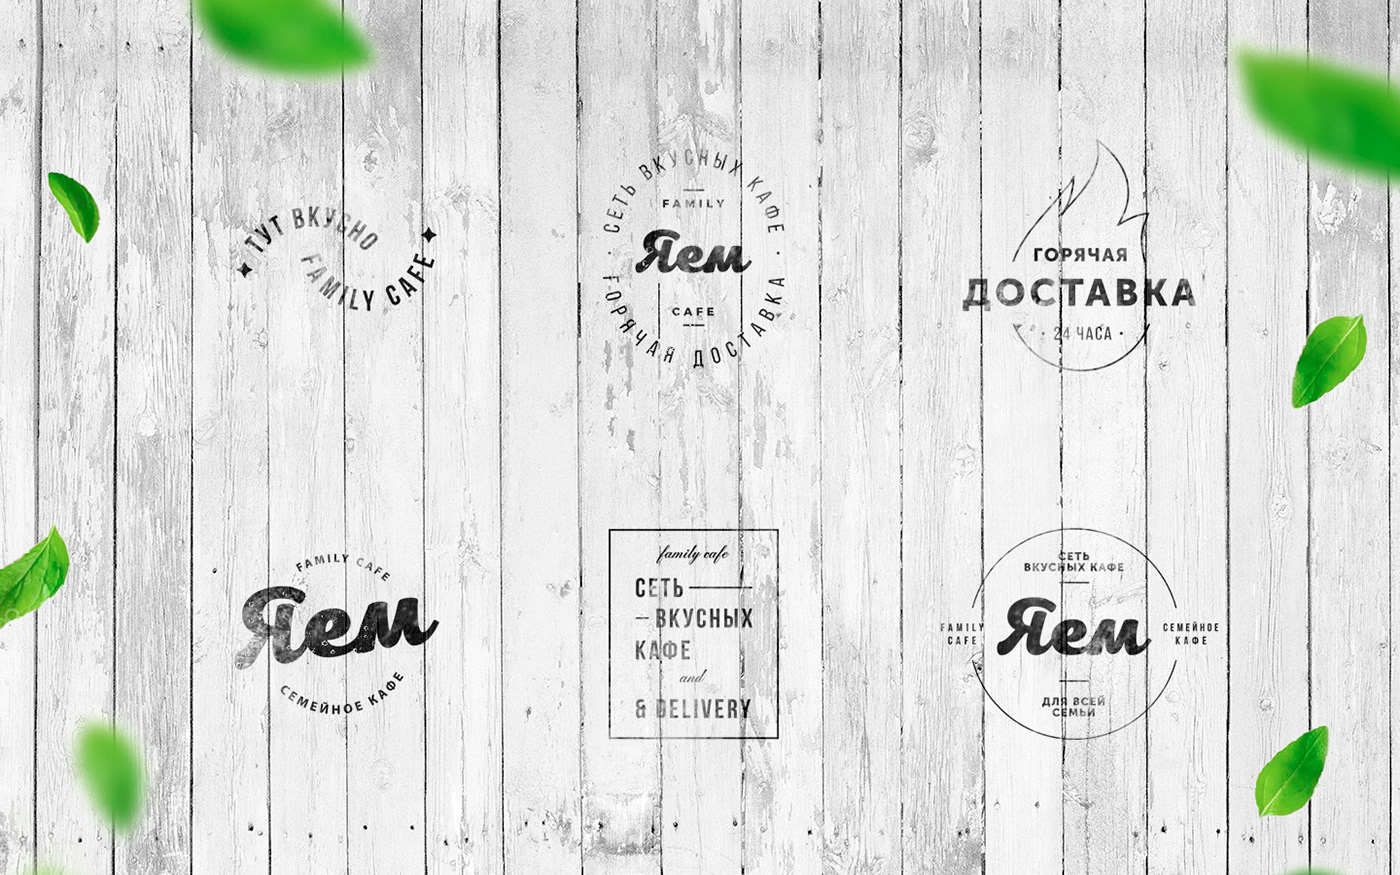 Cafe design delivery cafe delivery cafe brand family cafe family cafe brand family cafe logo семейное кафе семейное кафе логотип ЯЕМ ЯЕМ логотип